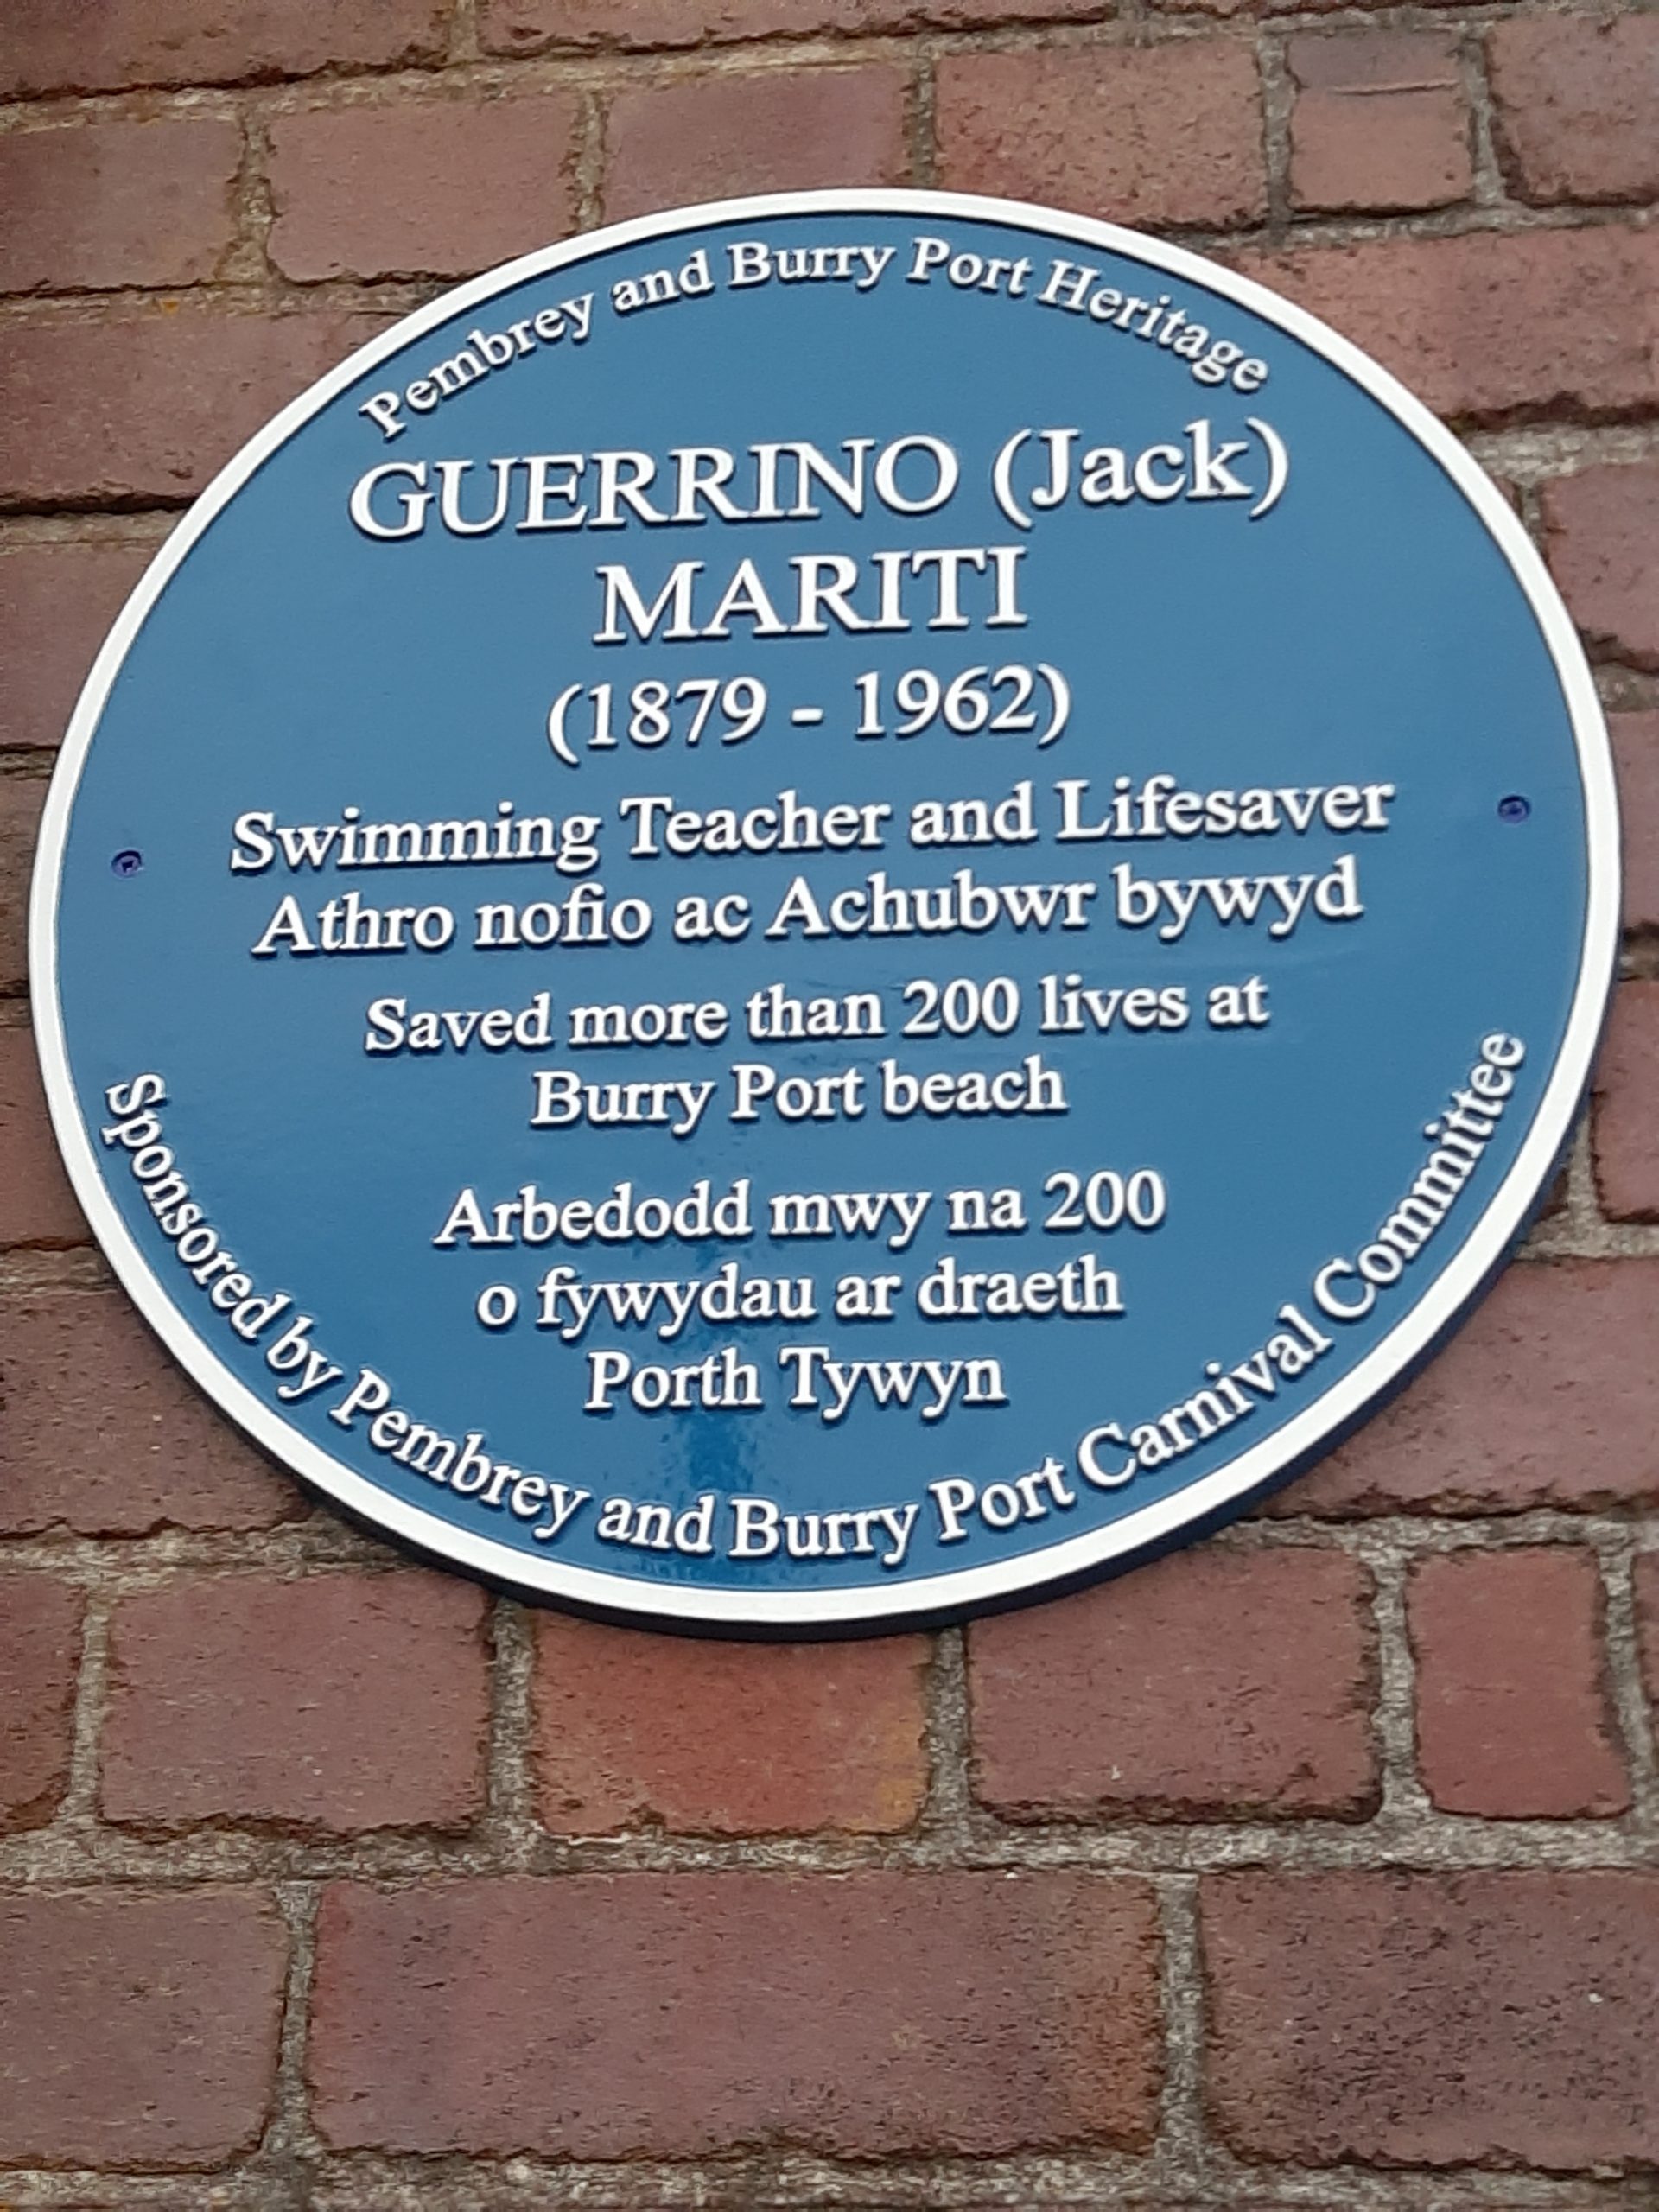 Jack Mariti Plaque
Now installed in the Harbour